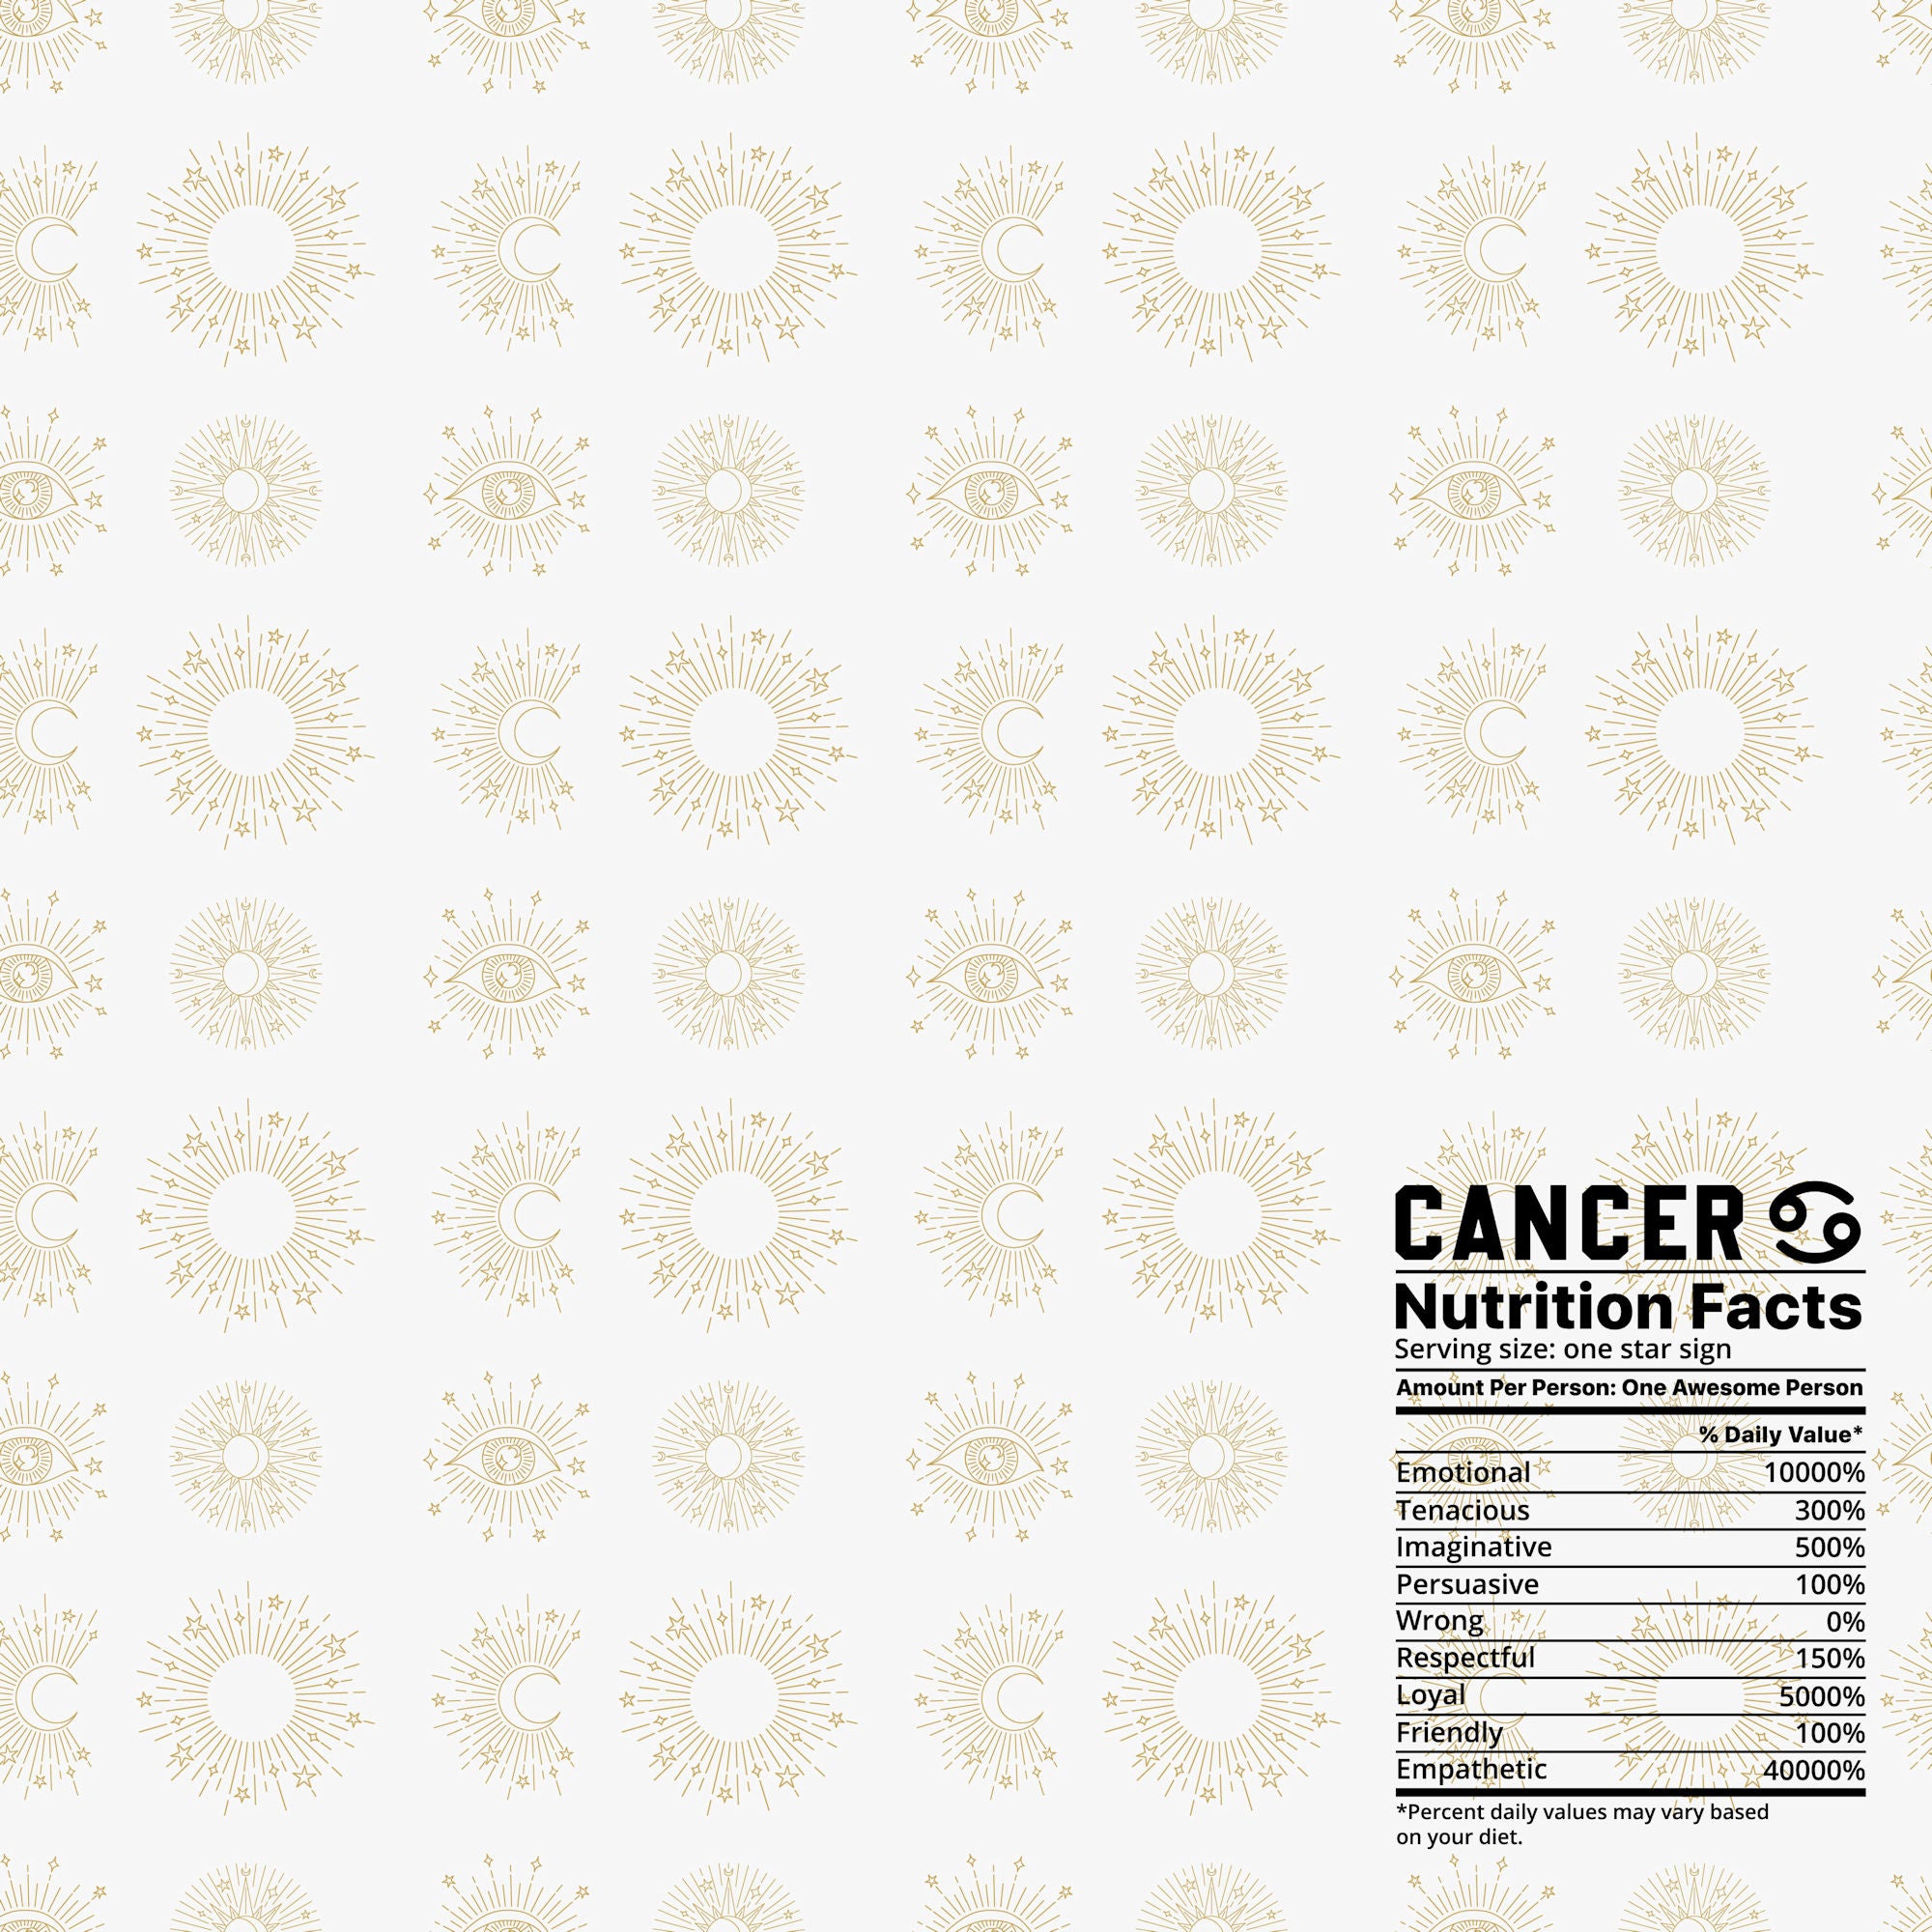 Astrology Collection Cancer 12 x 12 Double-Sided Scrapbook Paper by SSC Designs